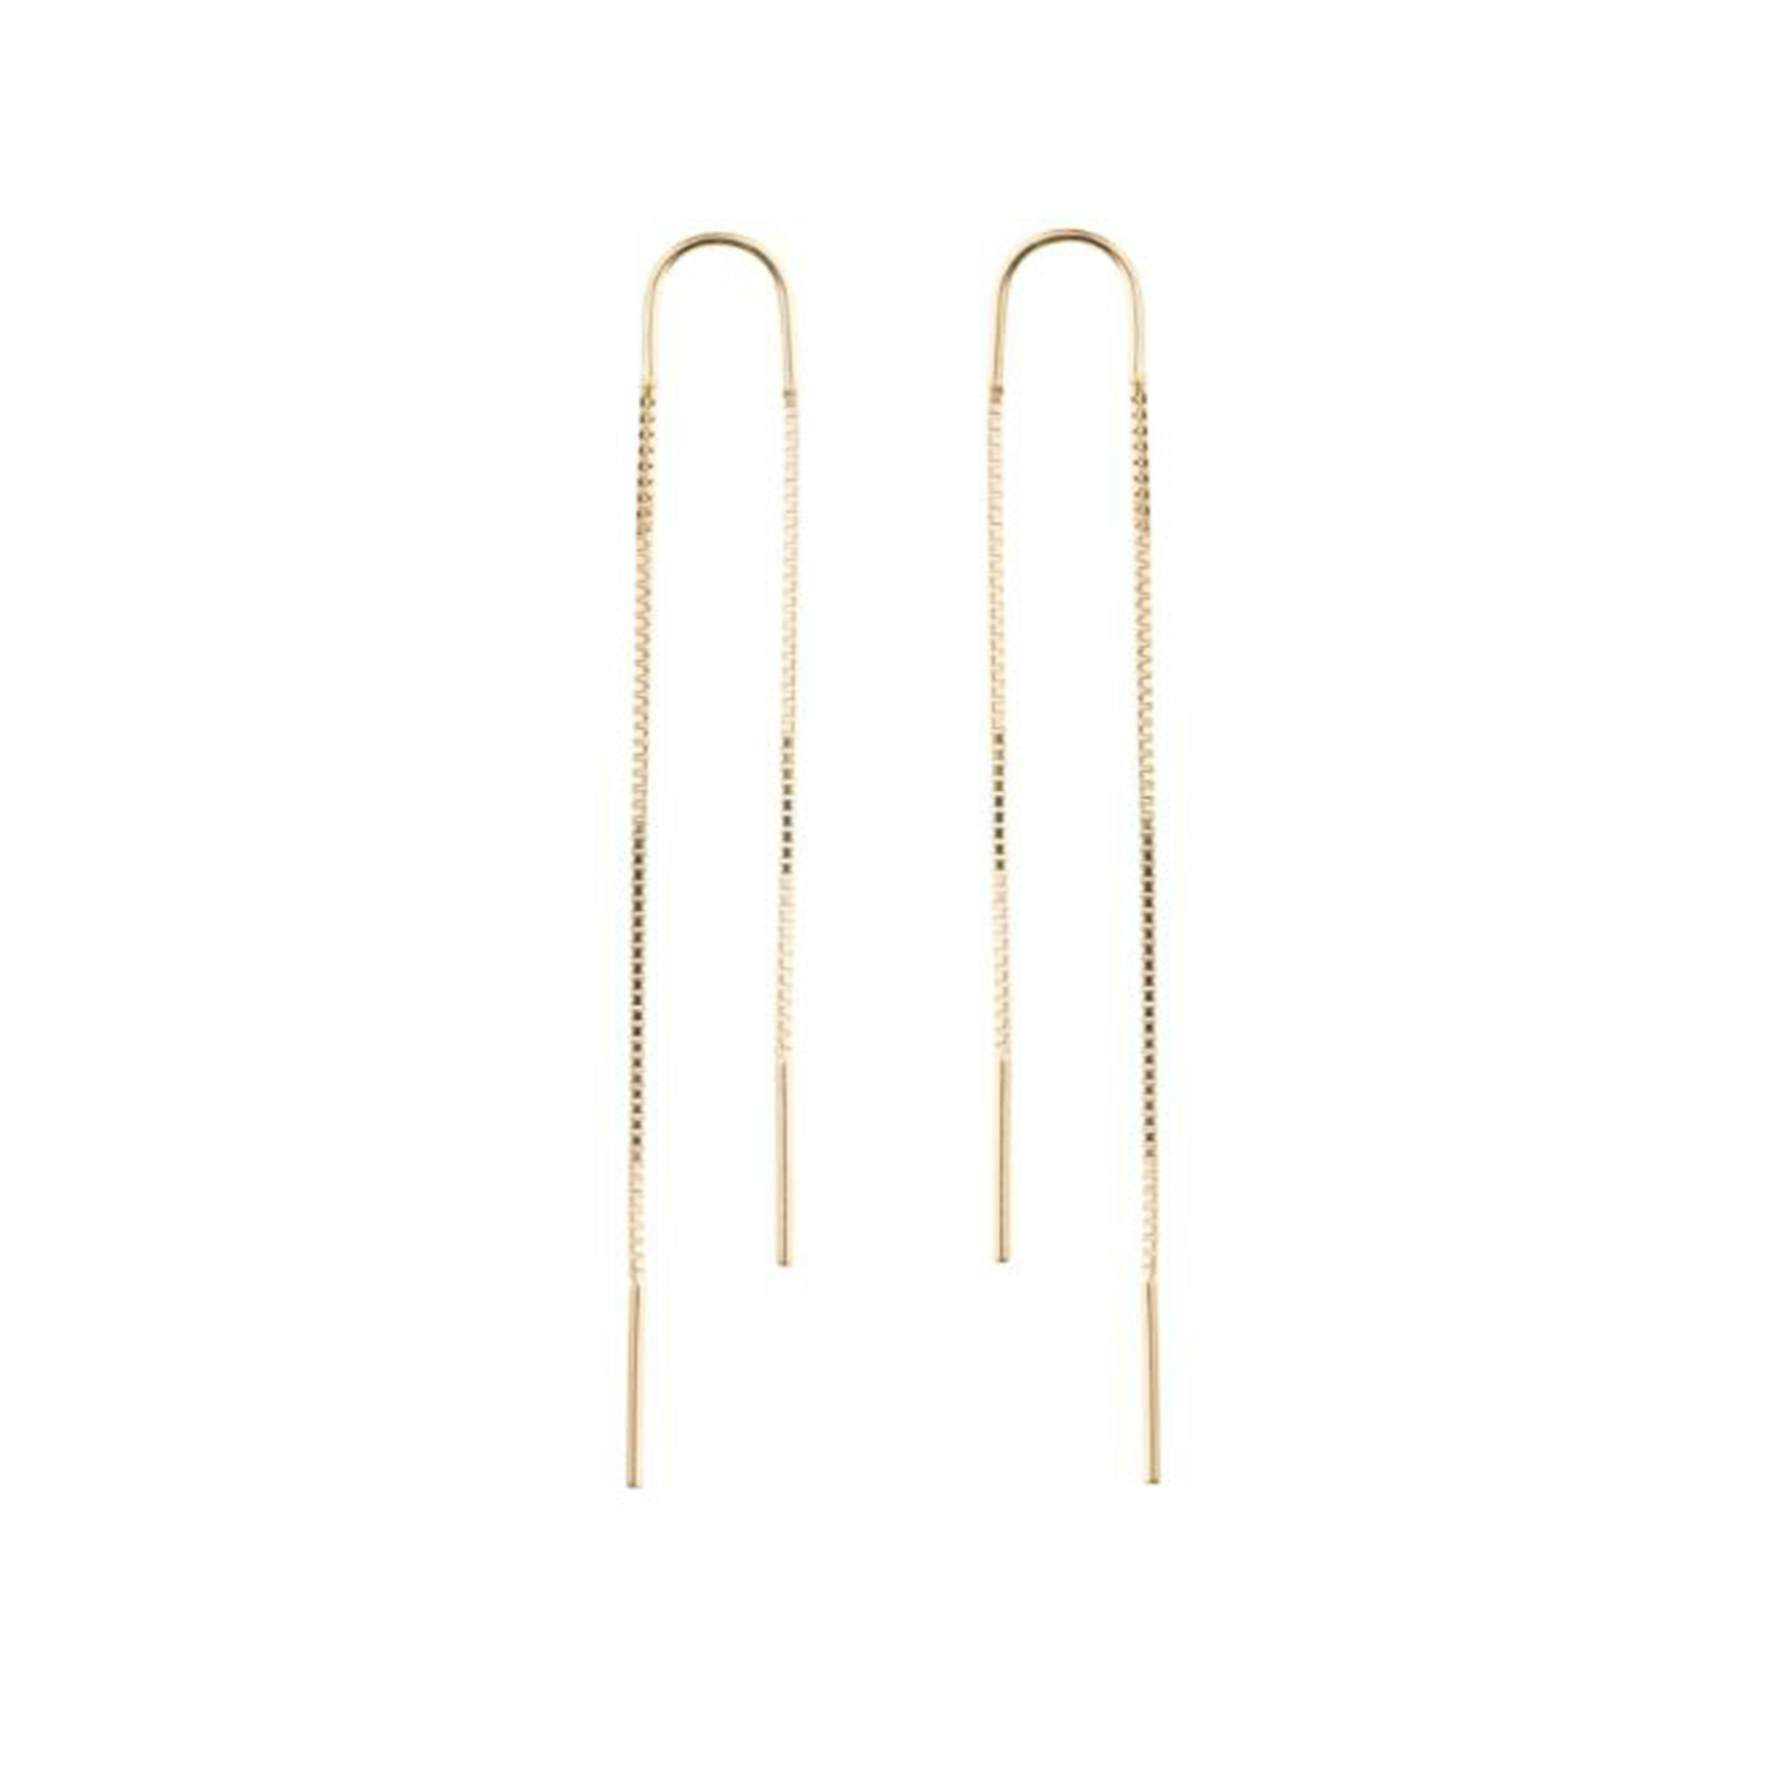 Double Chains Short from Pico in Goldplated-Silver Sterling 925